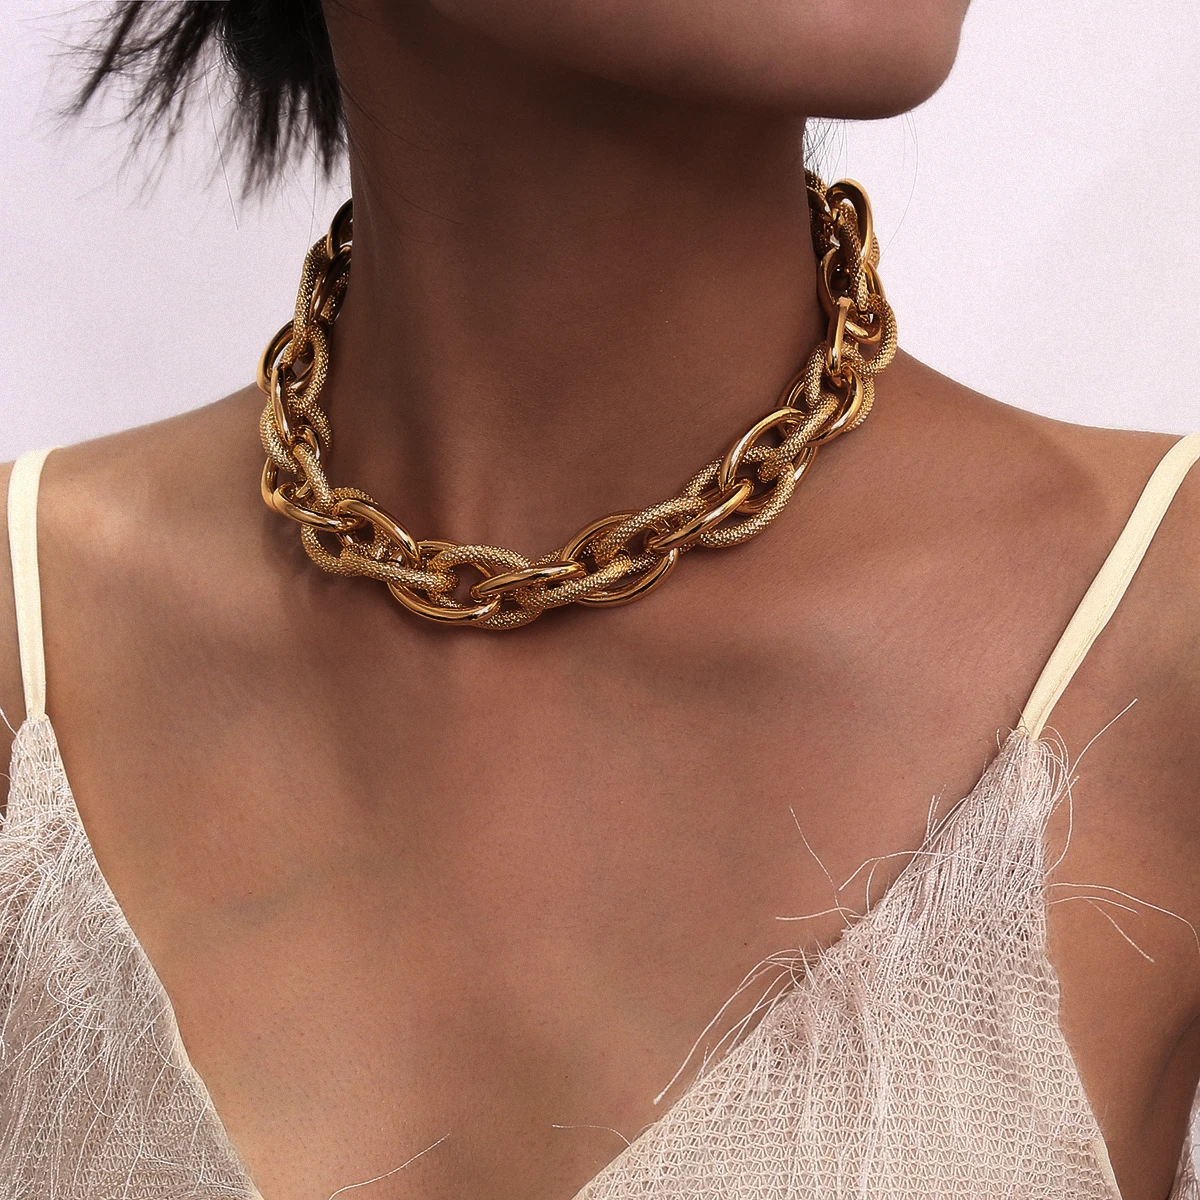 3 Pieces Punk Chain Choker Lock Pendant Necklace Long Multilayer Chunky Choker Ideal for Christmas gifts